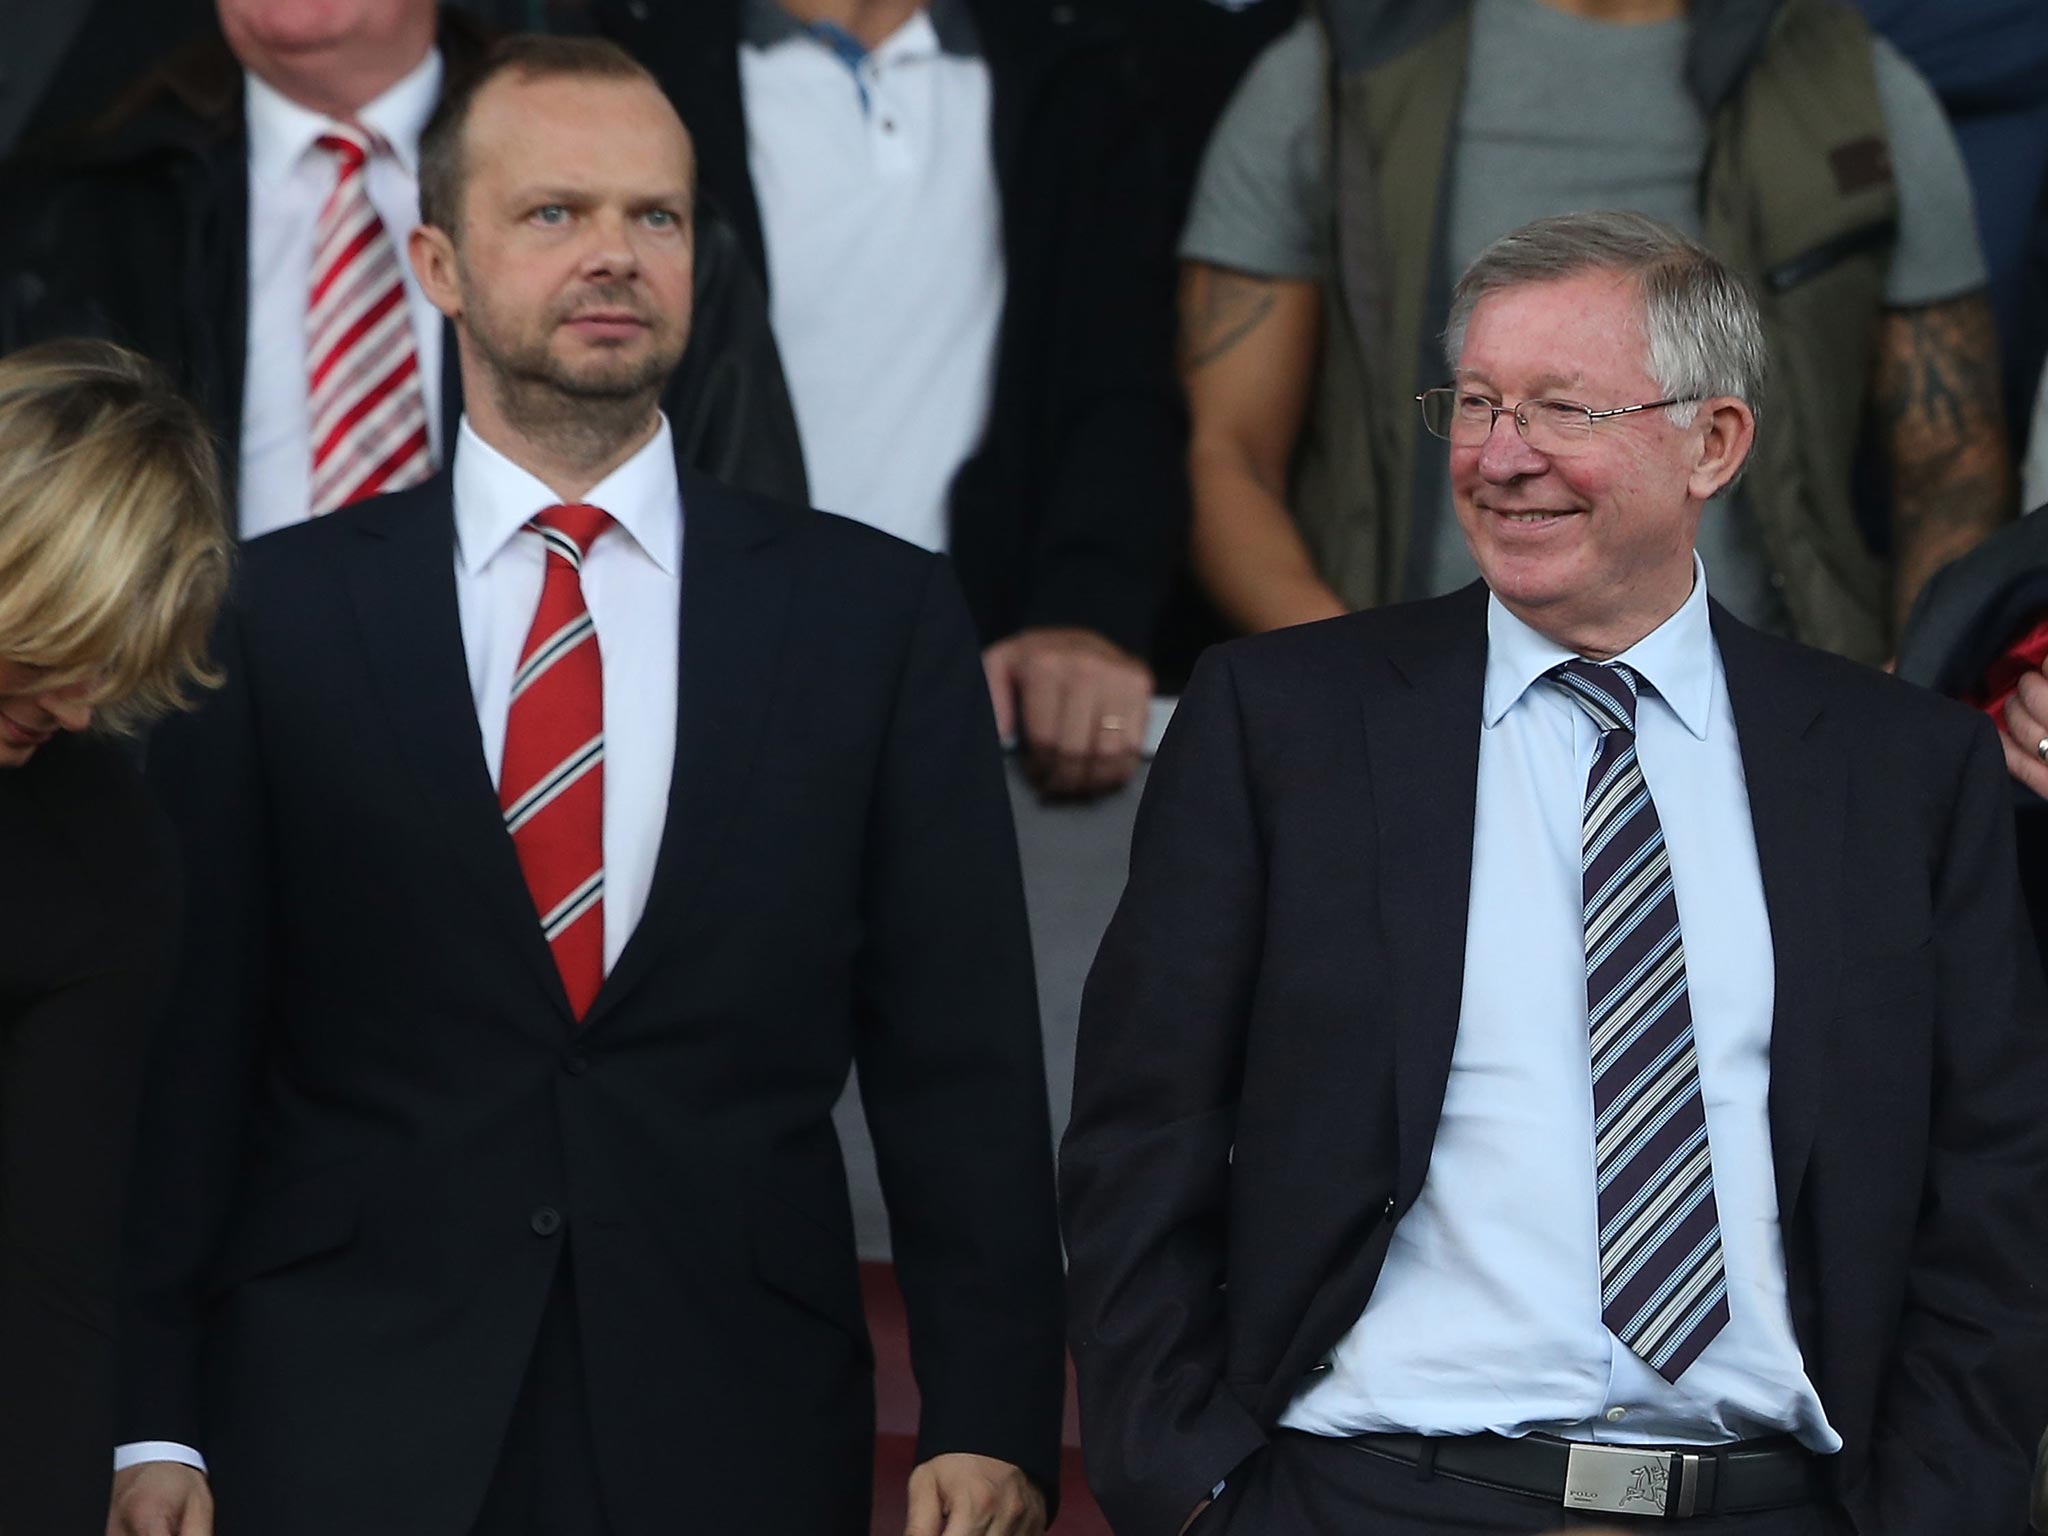 Manchester United chief executive Ed Woodward and former manager Sir Alex Ferguson